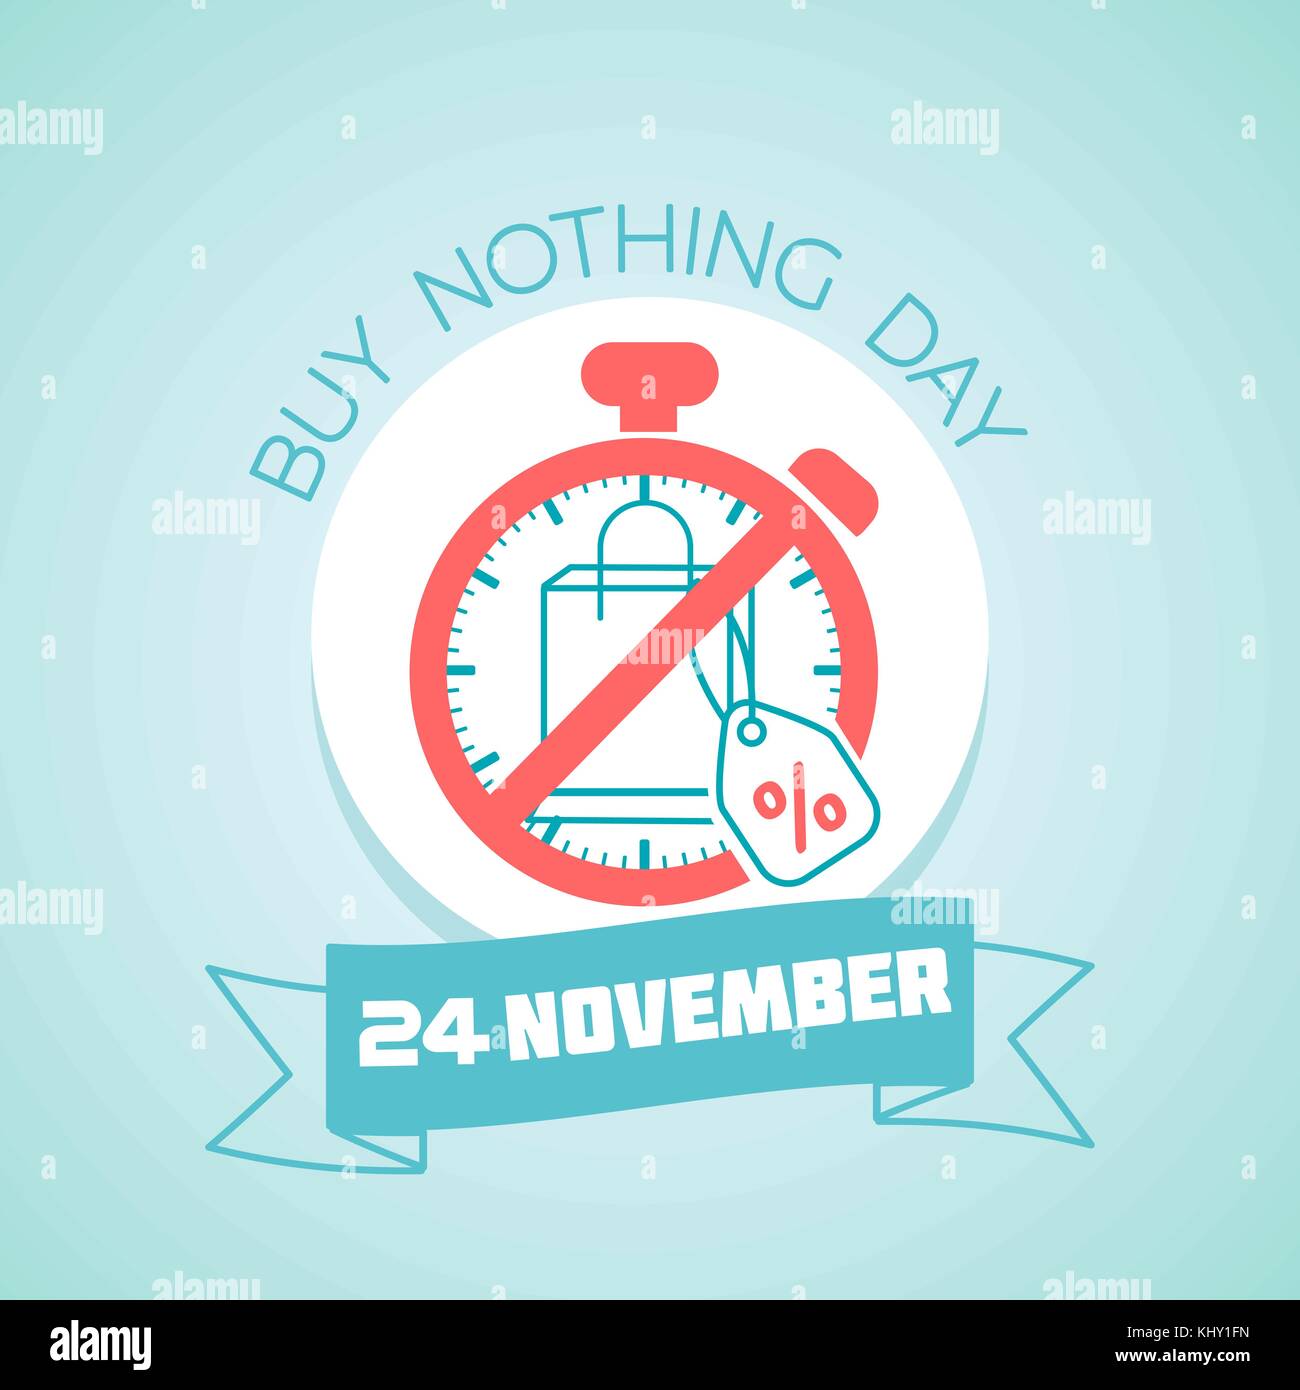 Calendar for each day on november 24. Greeting card. Holiday - Buy Nothing Day. Icon in the linear style Stock Vector